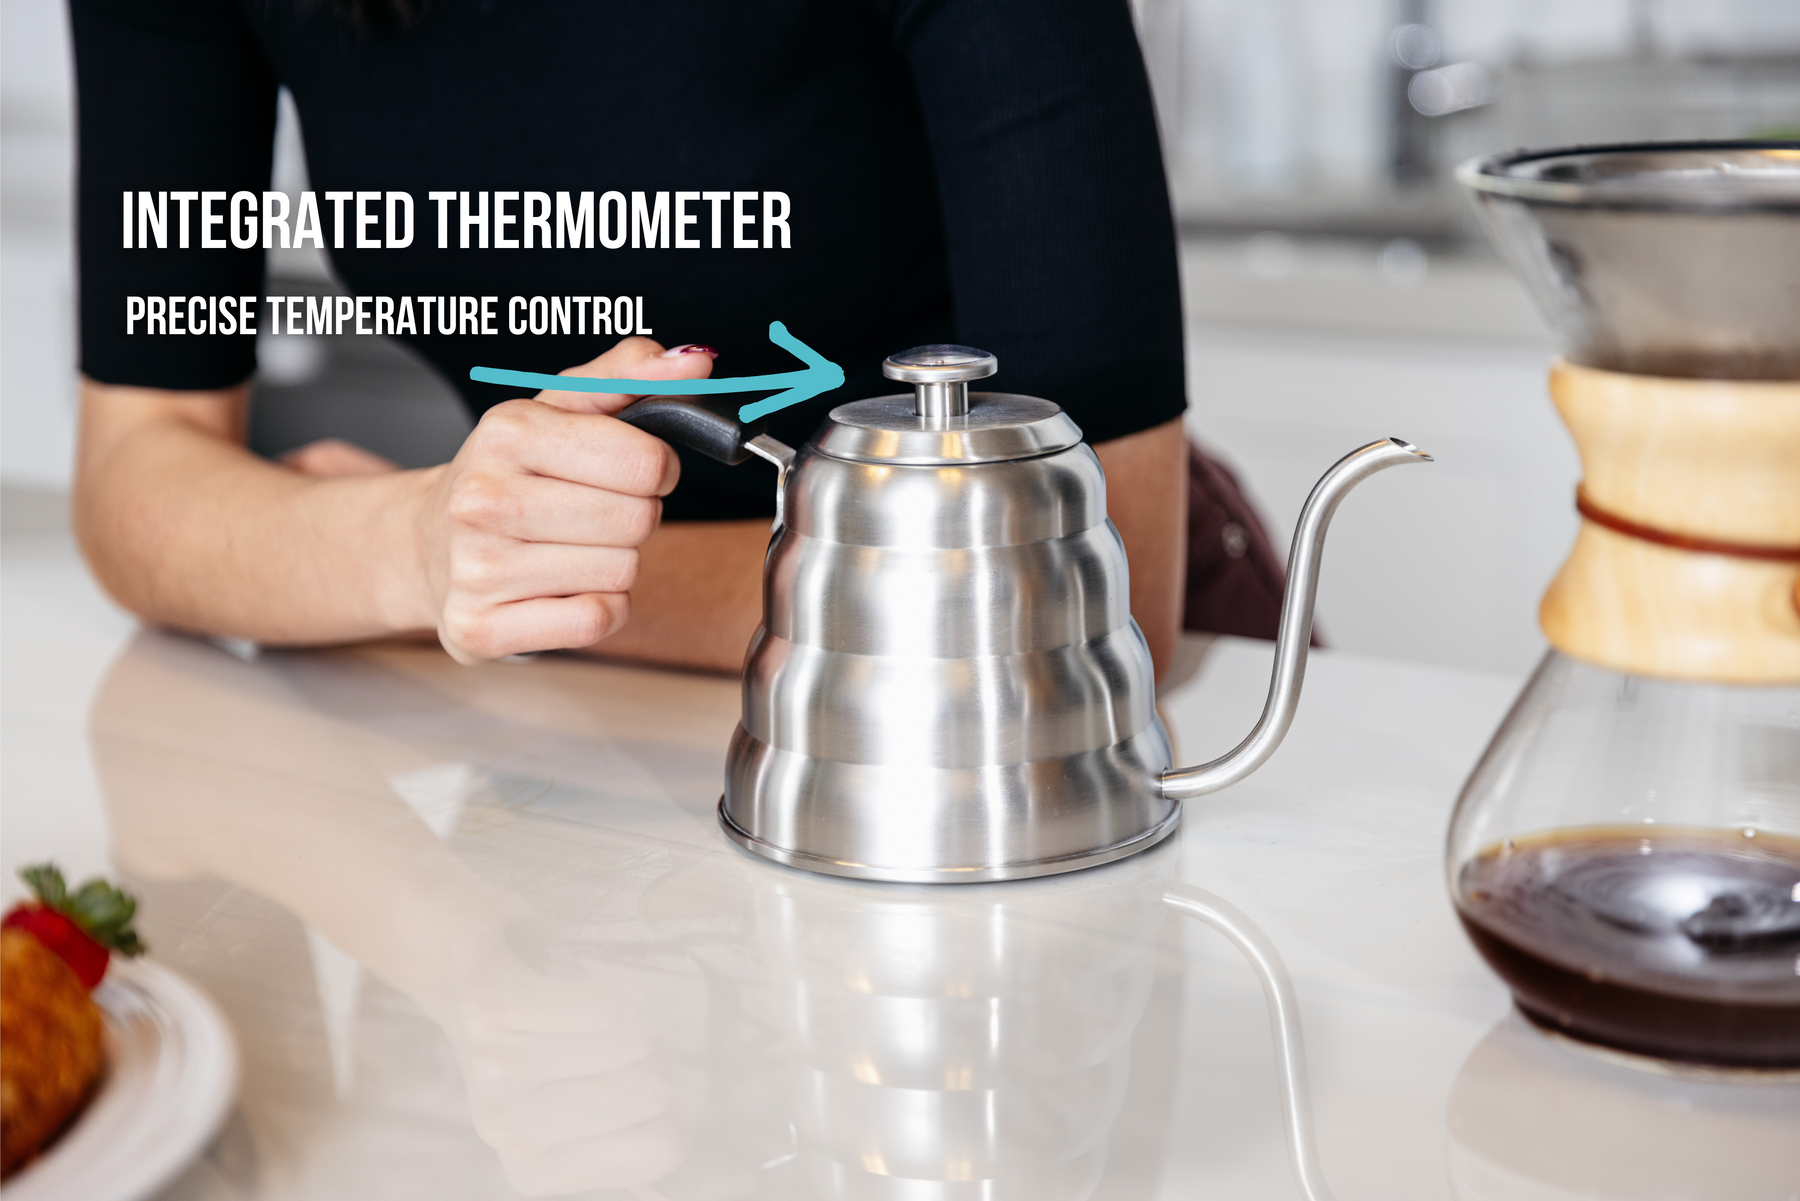 https://cdn.shopify.com/s/files/1/1846/4395/products/thermo_kettle_1800x1800.png?v=1657629412